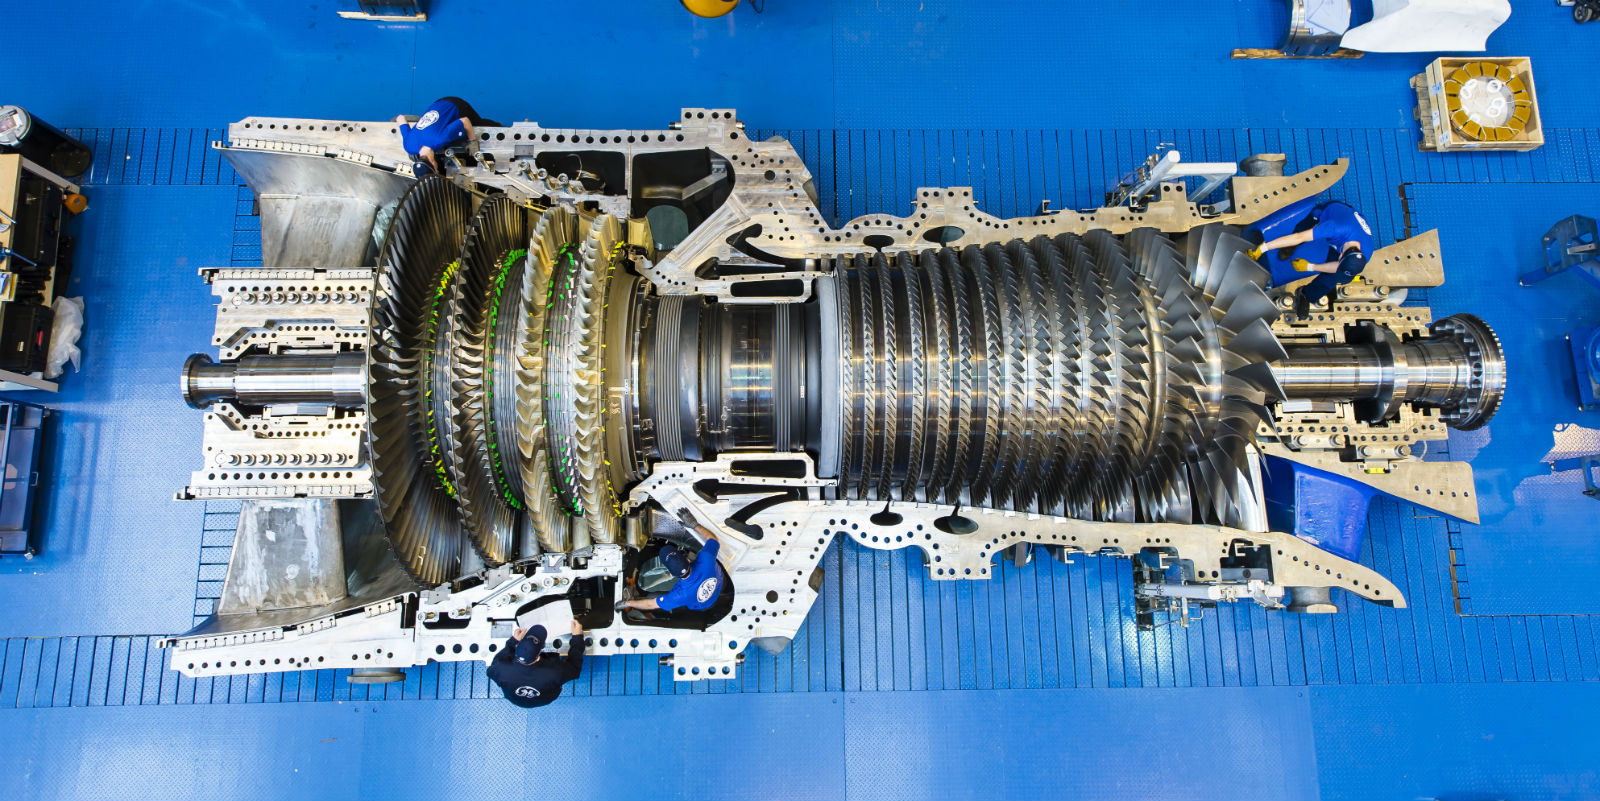 Monster Machines: The World’s Biggest And Best Gas Turbine Can Power 400,000 Homes